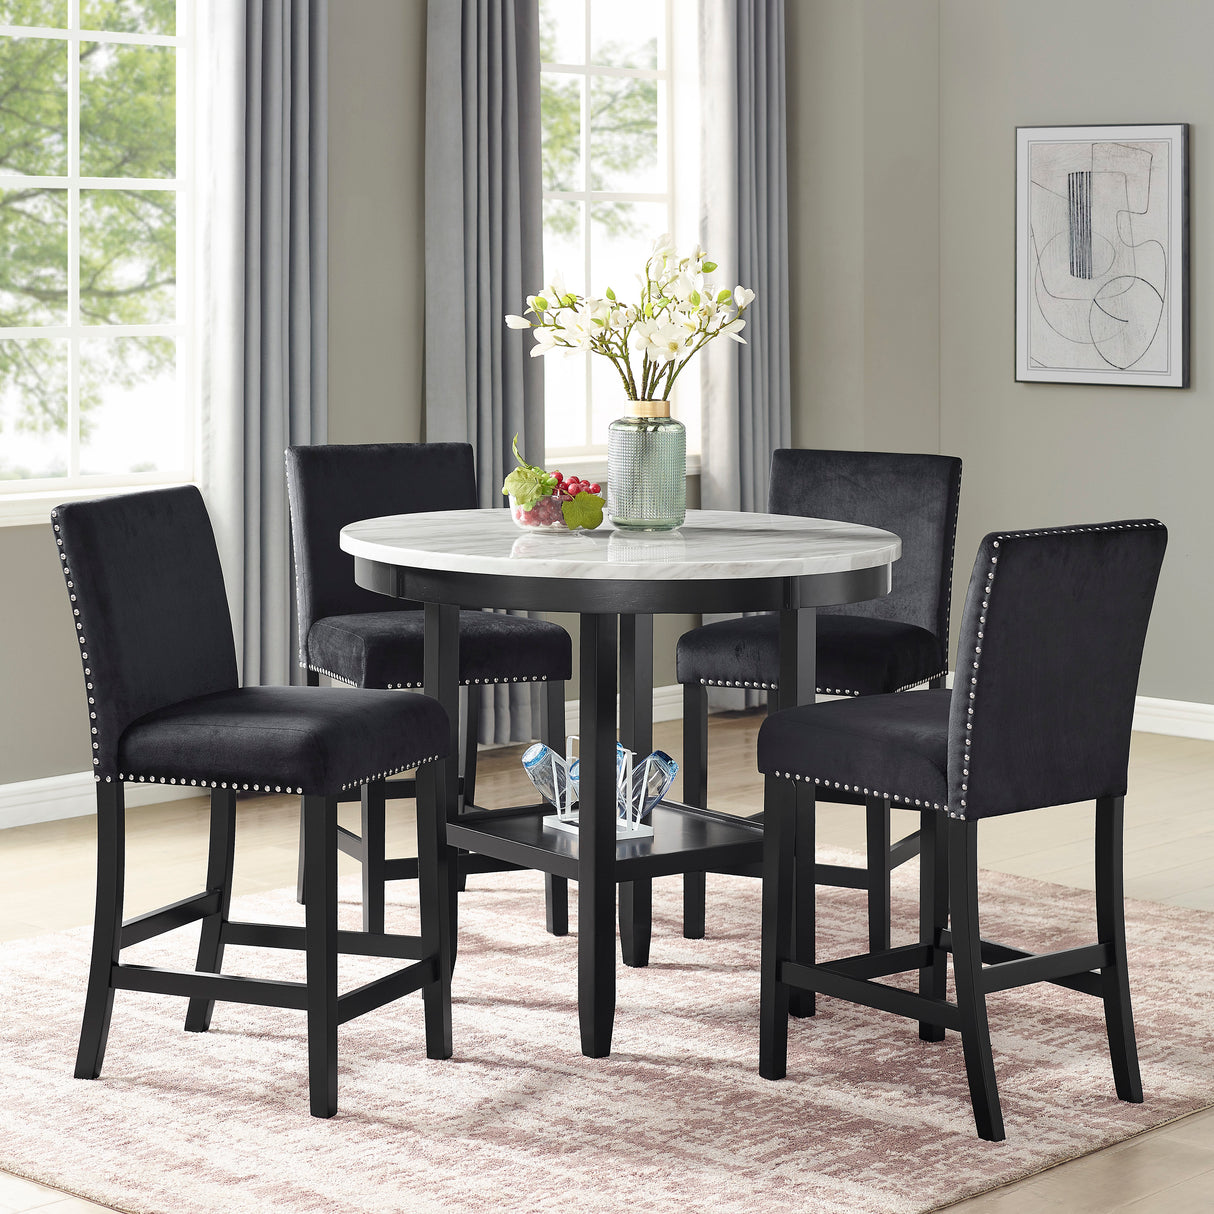 Lennon Black Round Counter Height Dining Set